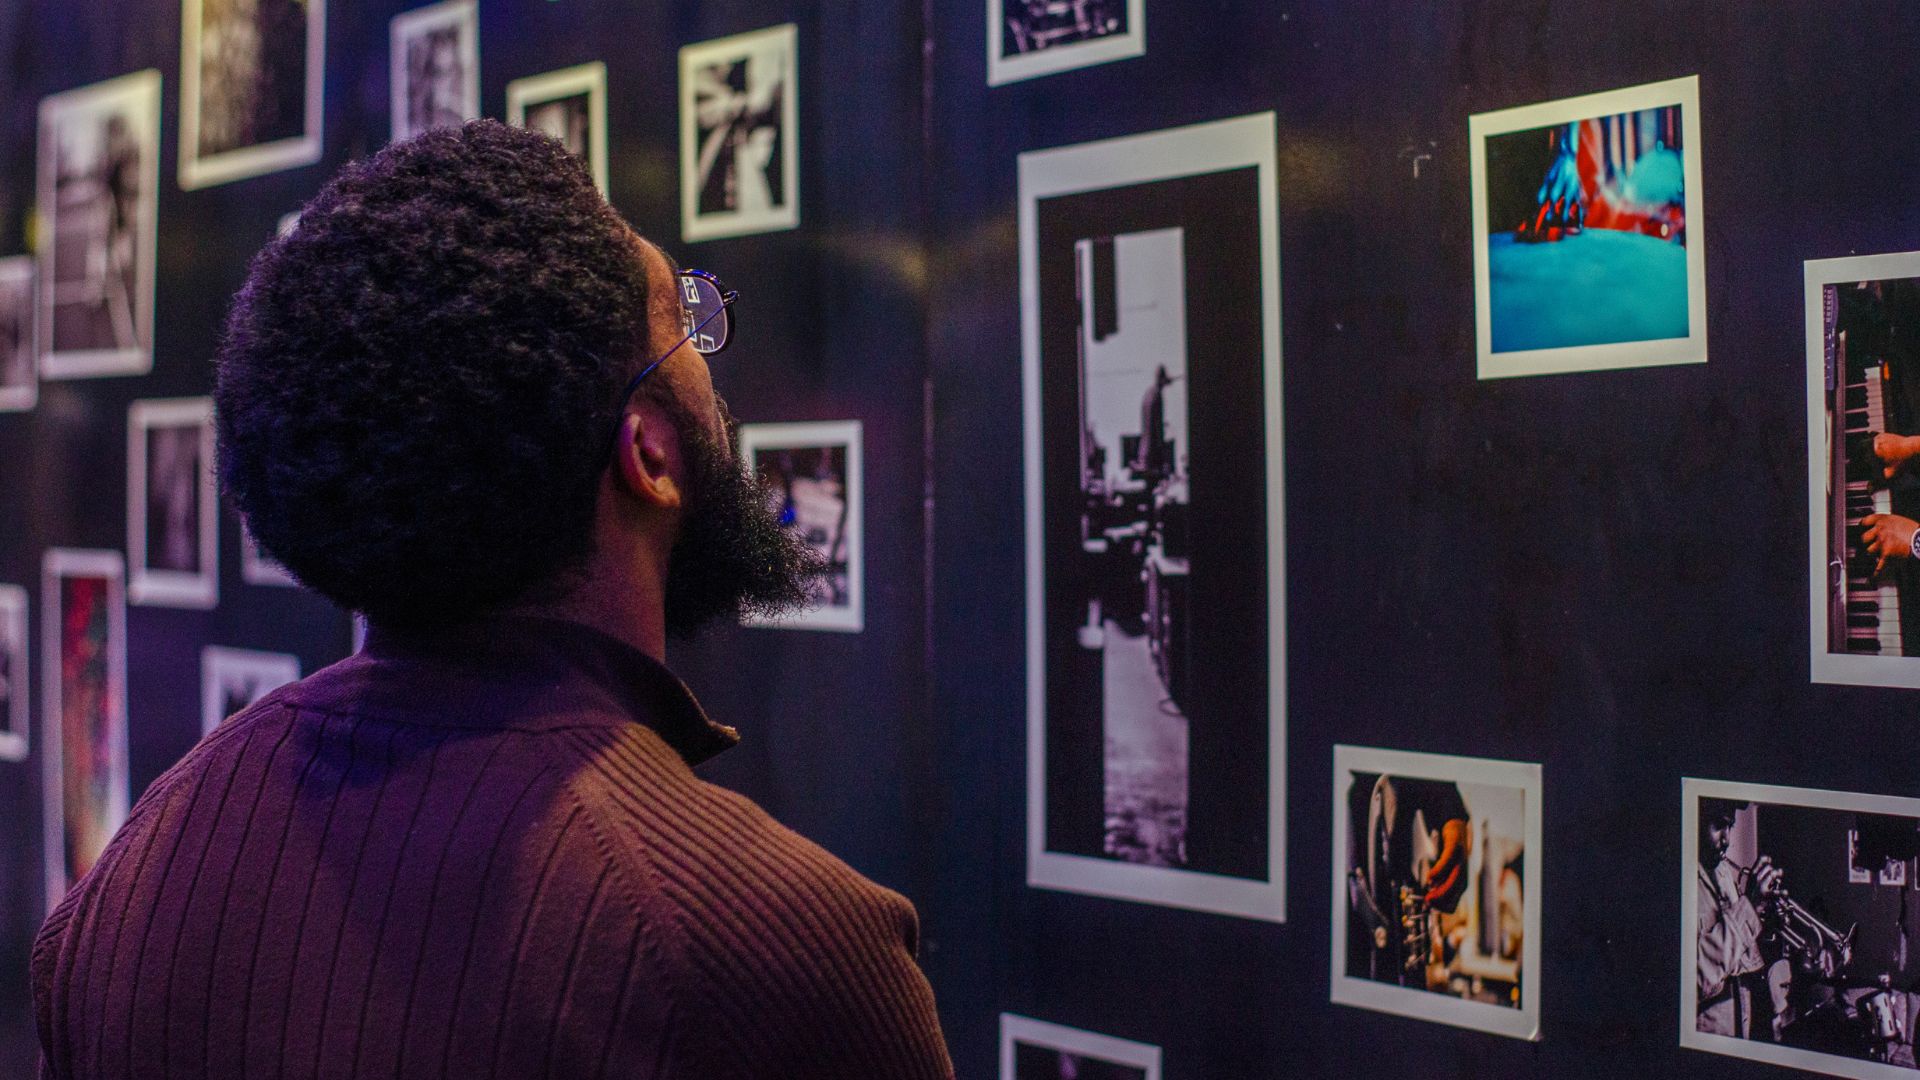 A man views a photography exhibit at The Dark Room at The Grandel.